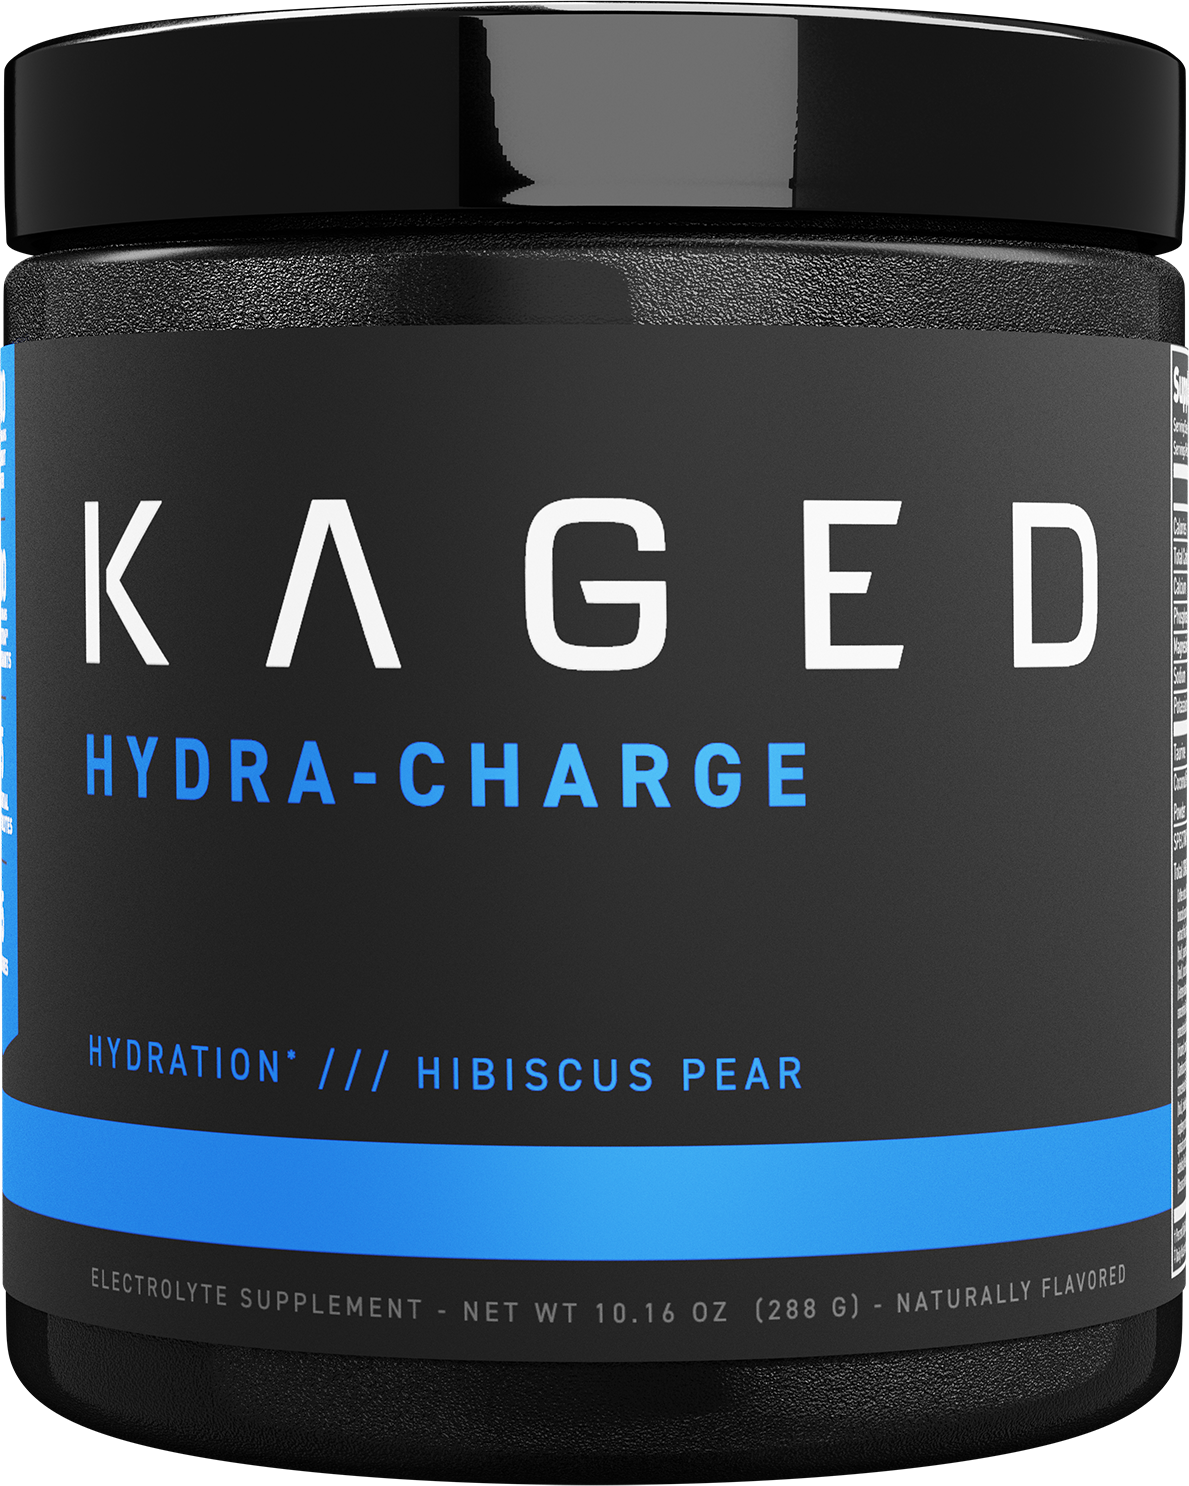 Kaged Hydra-Charge Hibiscus Pear